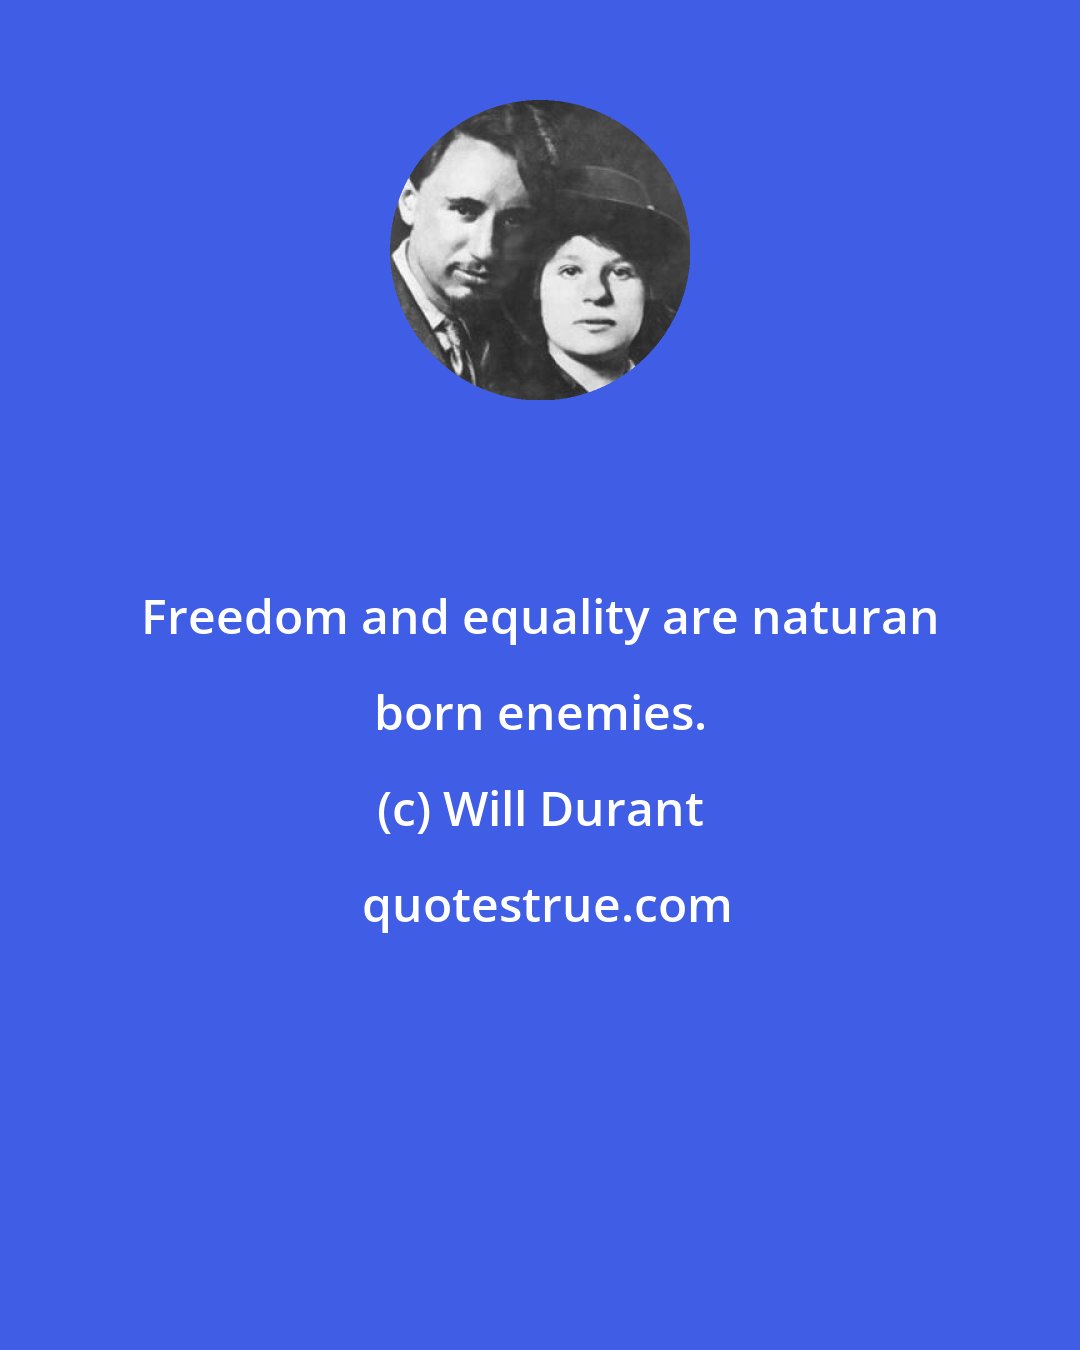 Will Durant: Freedom and equality are naturan born enemies.